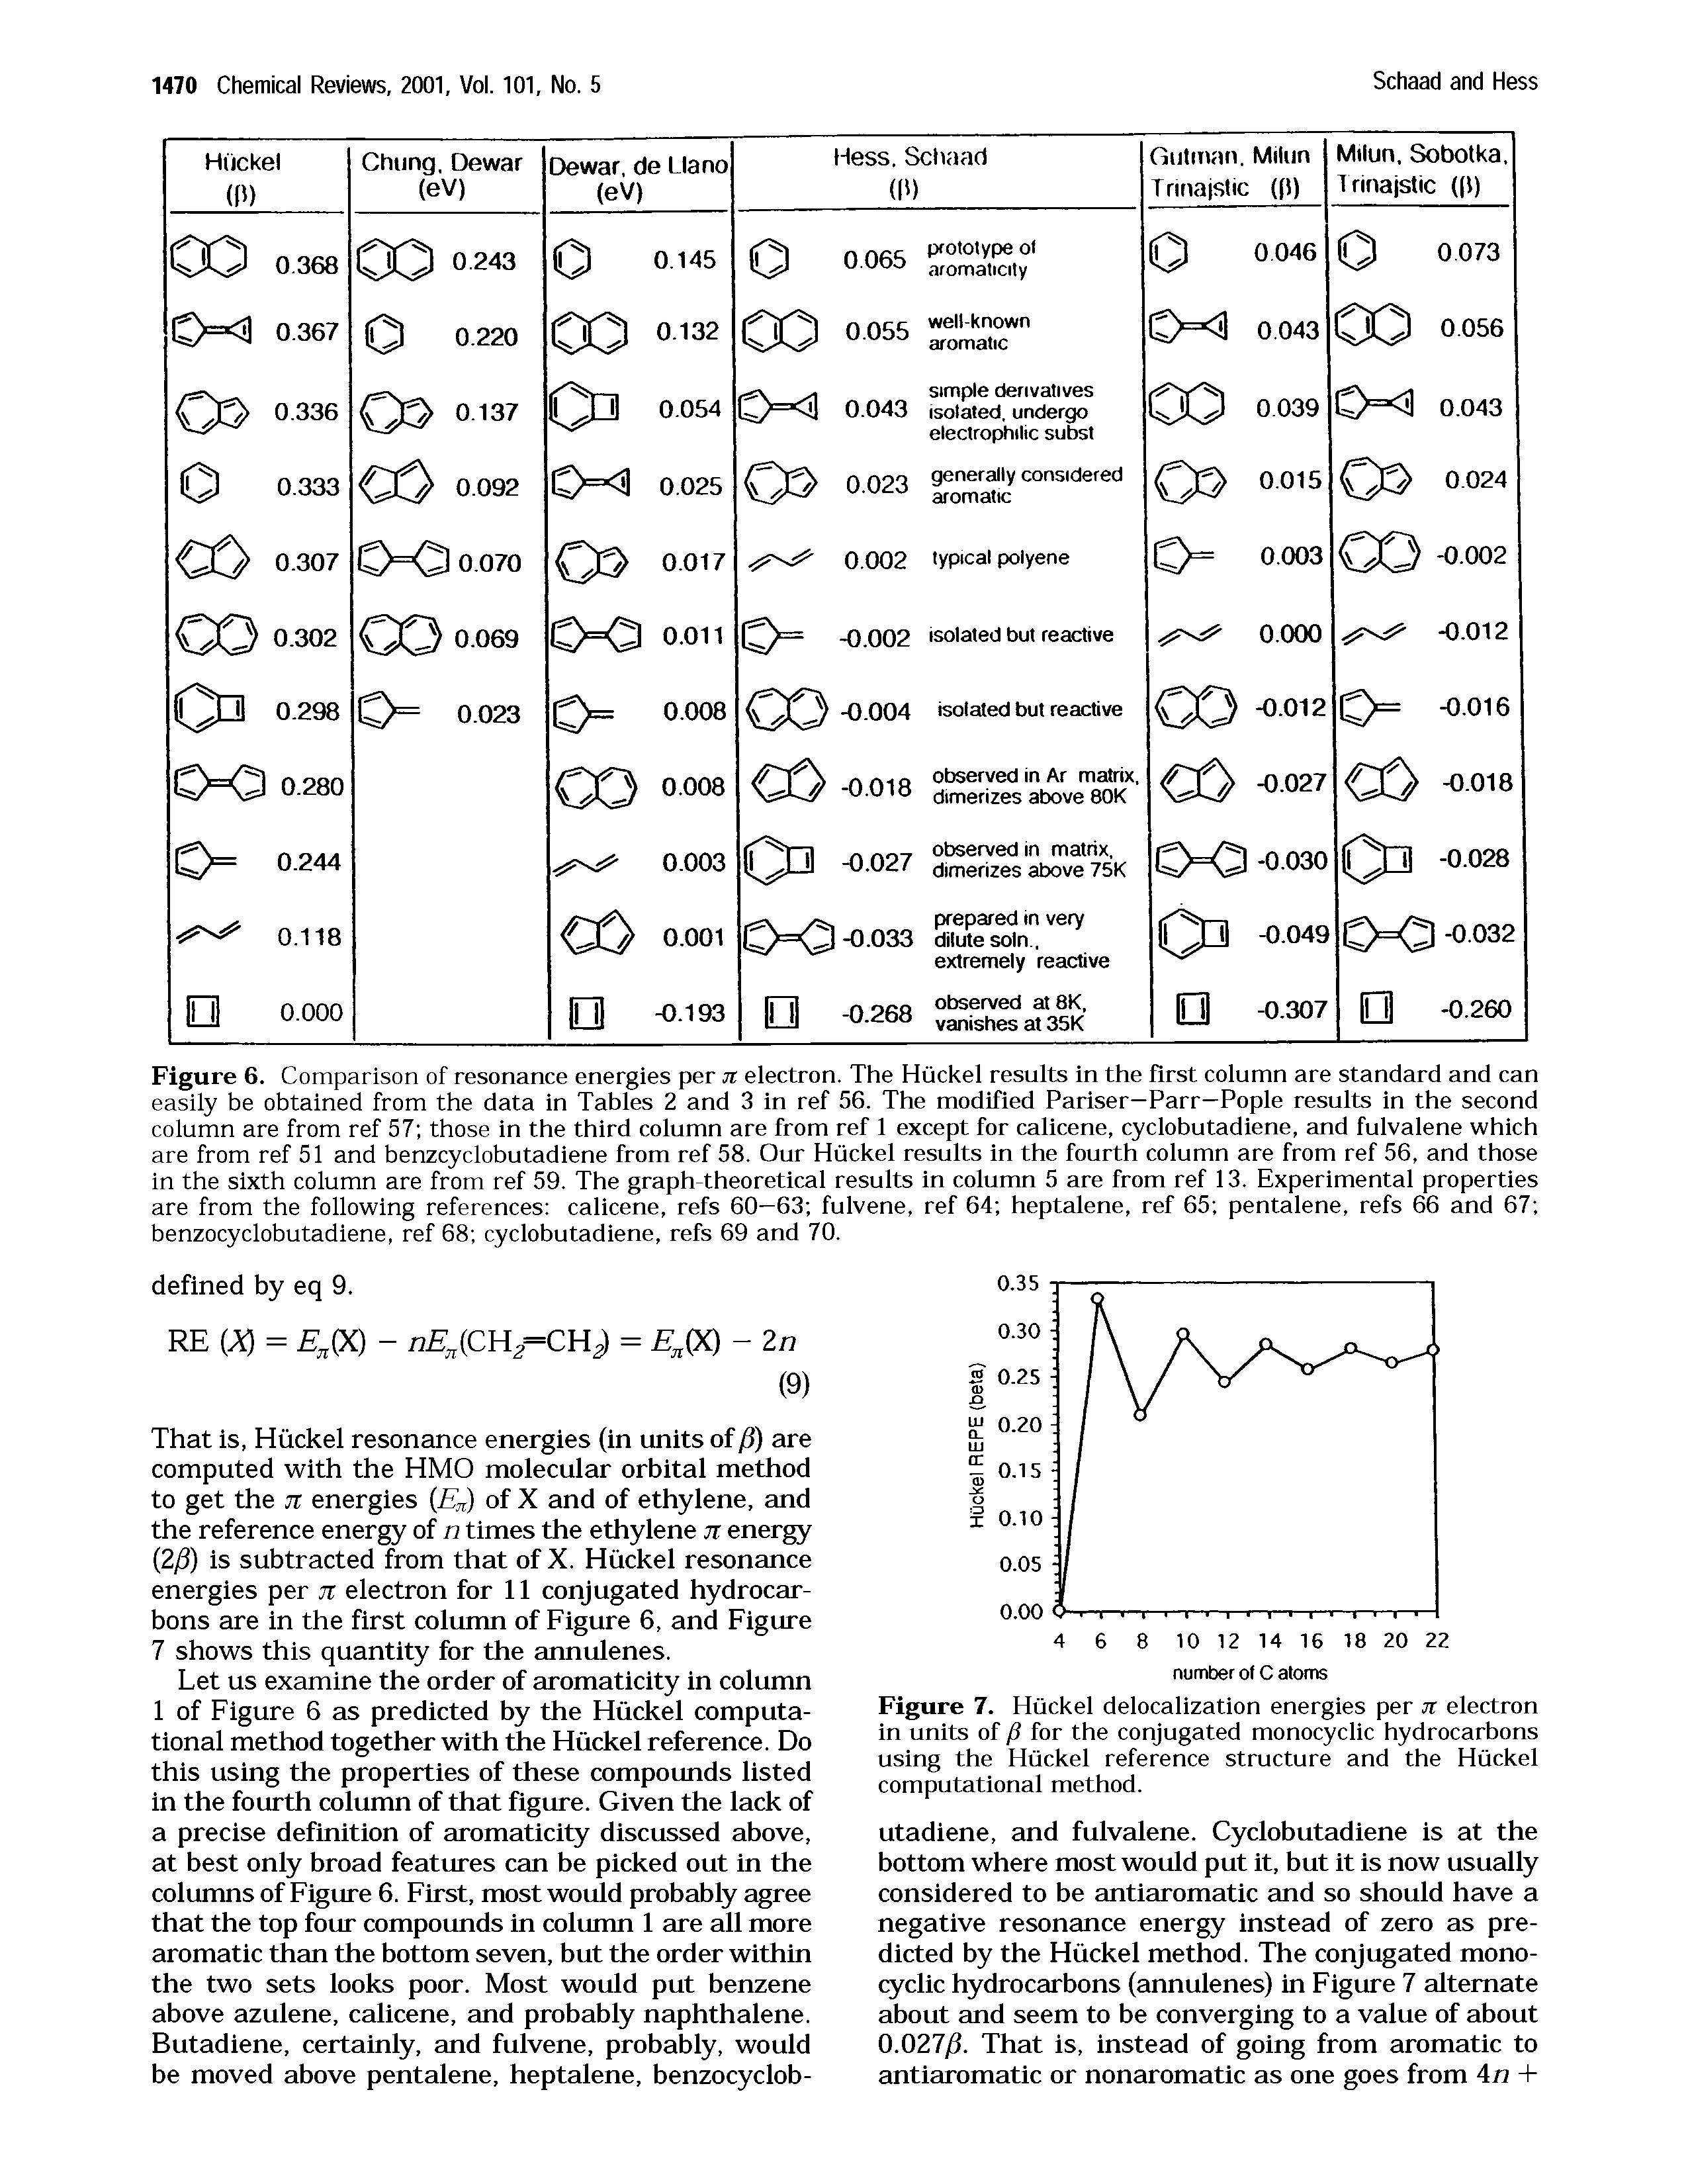 Figure 7. Hiickel delocalization energies per electron in units of p for the conjugated monocyclic hydrocarbons using the Huckel reference structure and the Hiickel computational method.